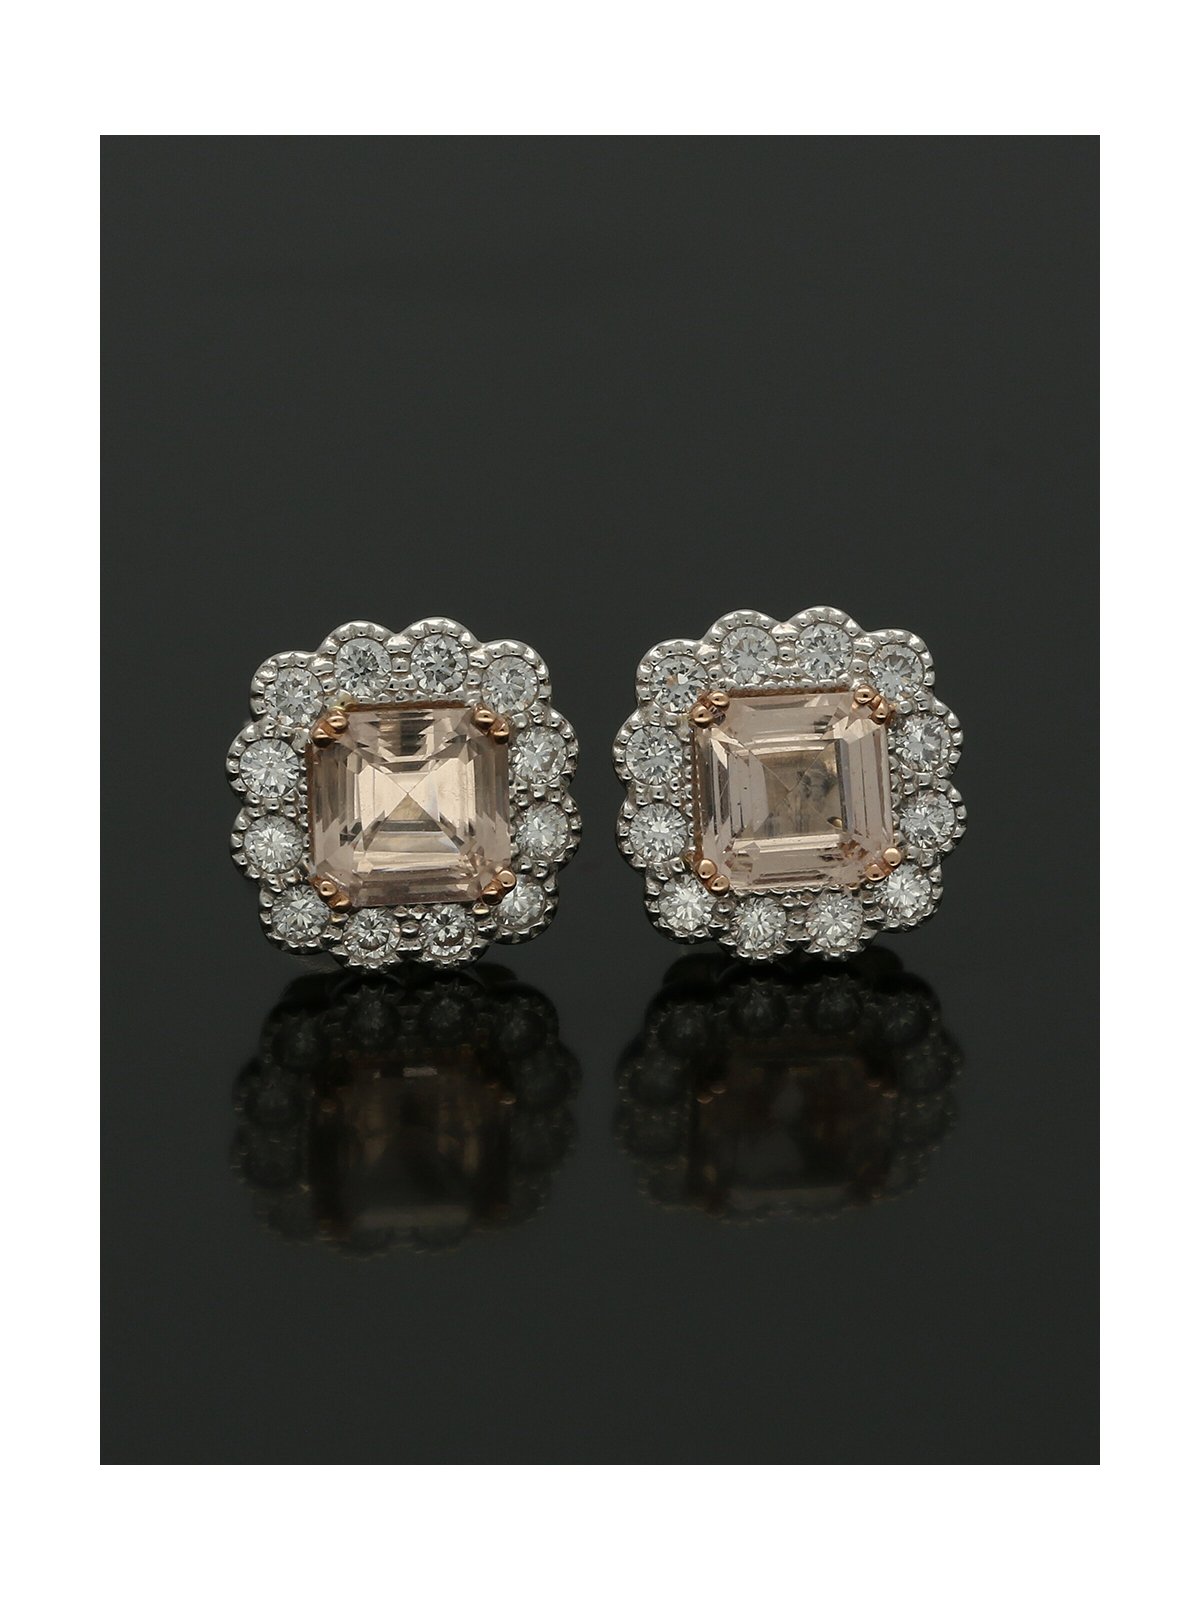 Morganite and Diamond Cluster Stud Earrings in 18ct White and Rose Gold